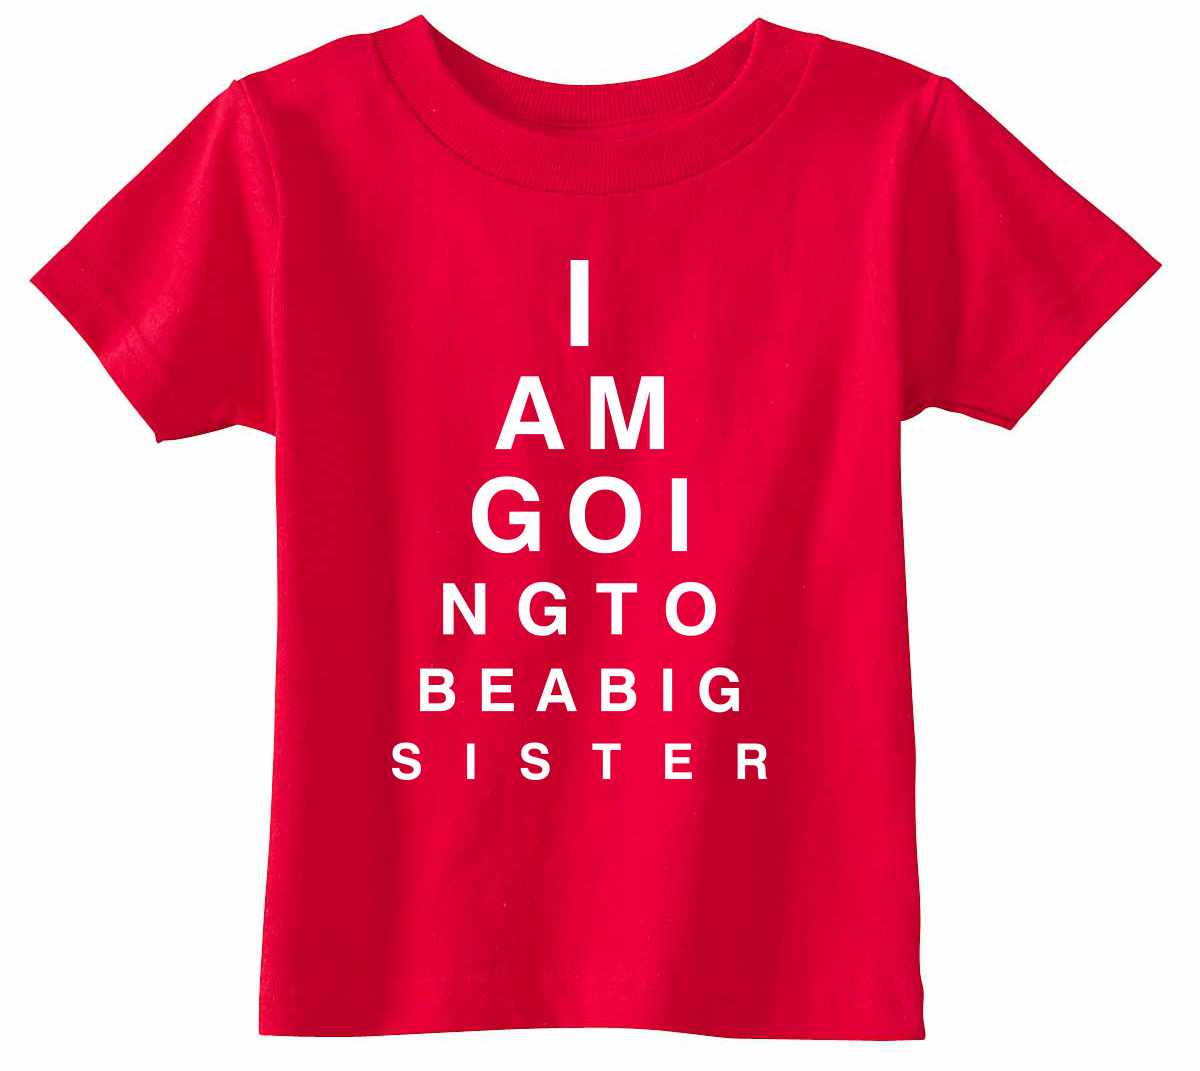 I AM GOING TO BE BIG SISTER EYE CHART Infant/Toddler  (#1099-7)